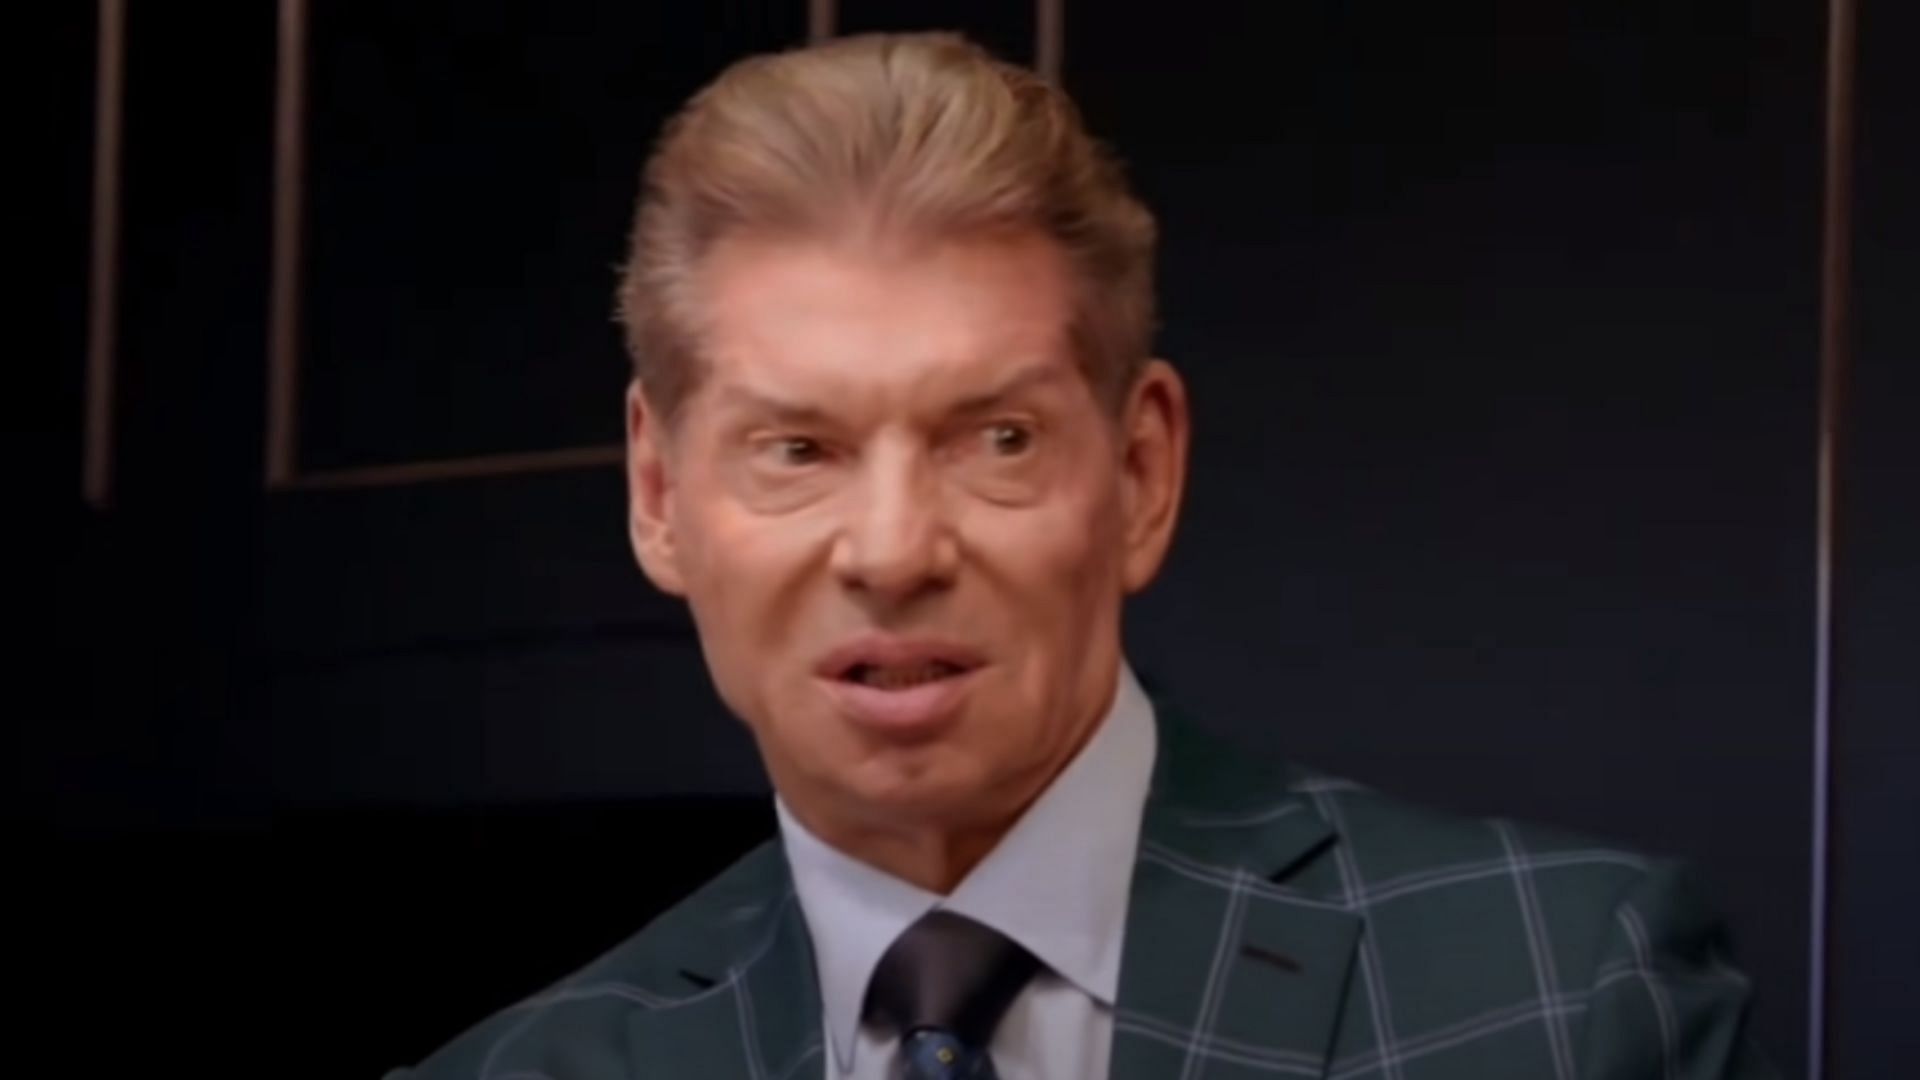 Will Vince McMahon&#039;s match have a big swerve?